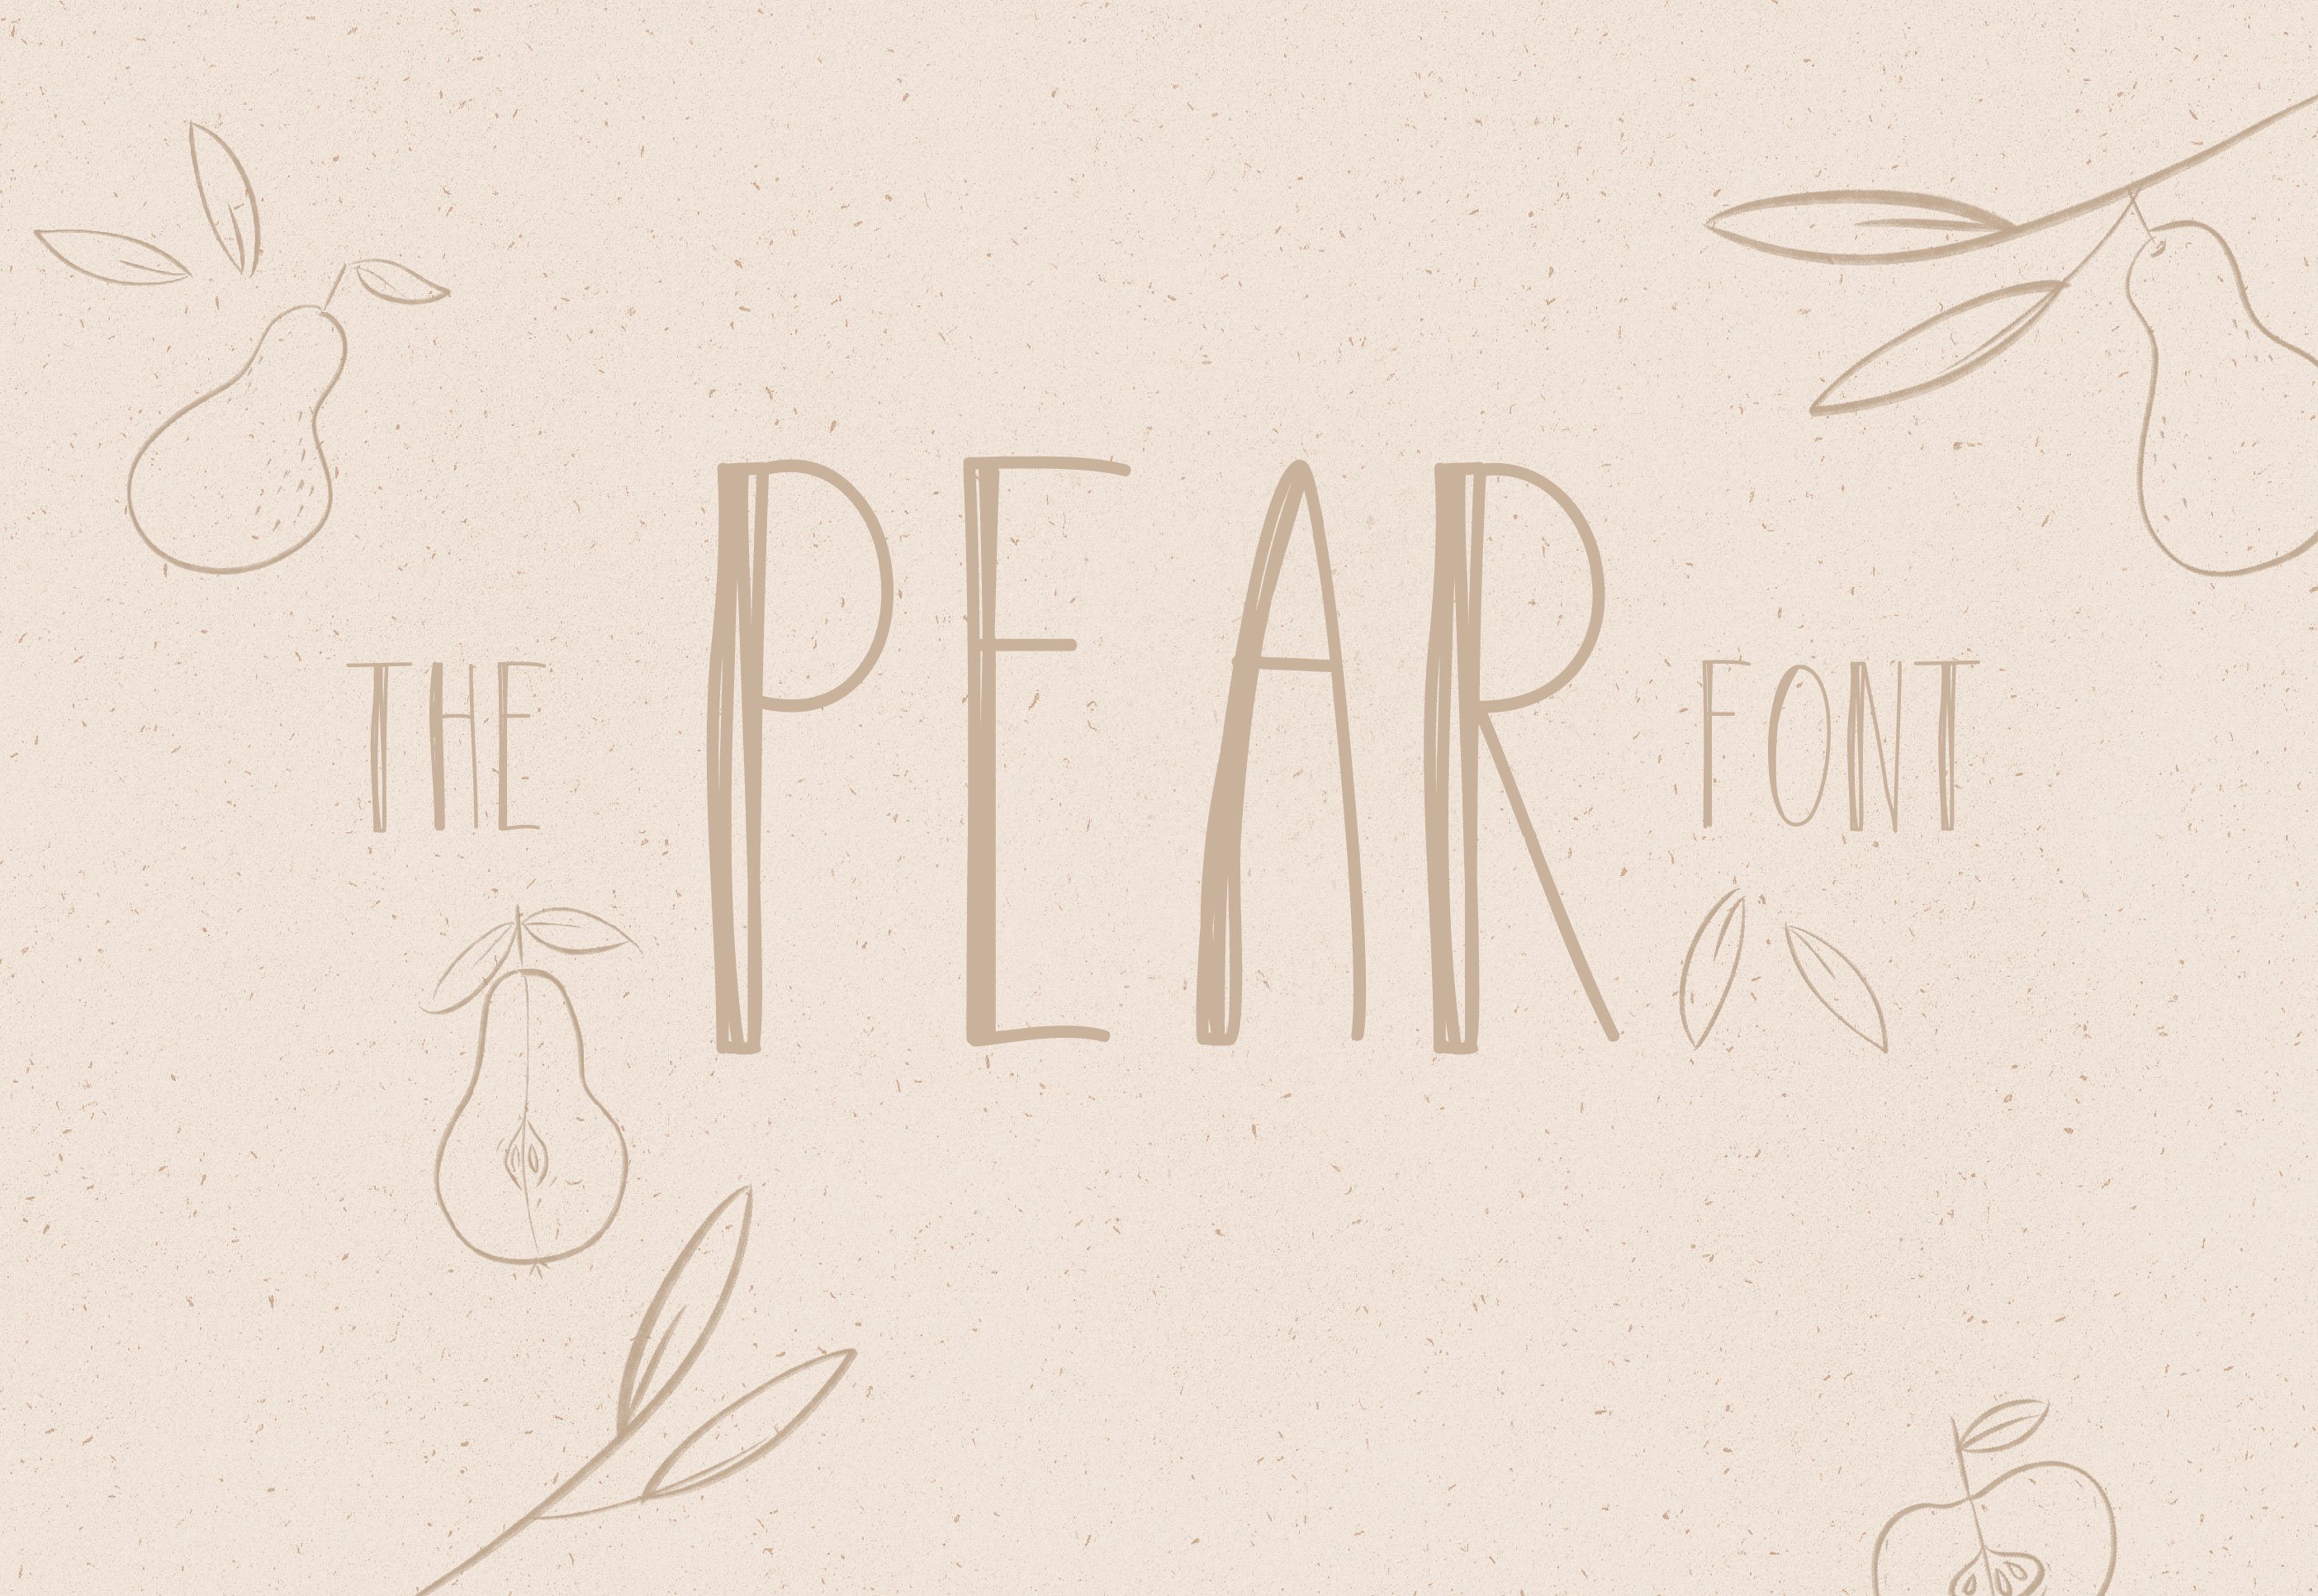 The Pear Font / handwritten style cover image.